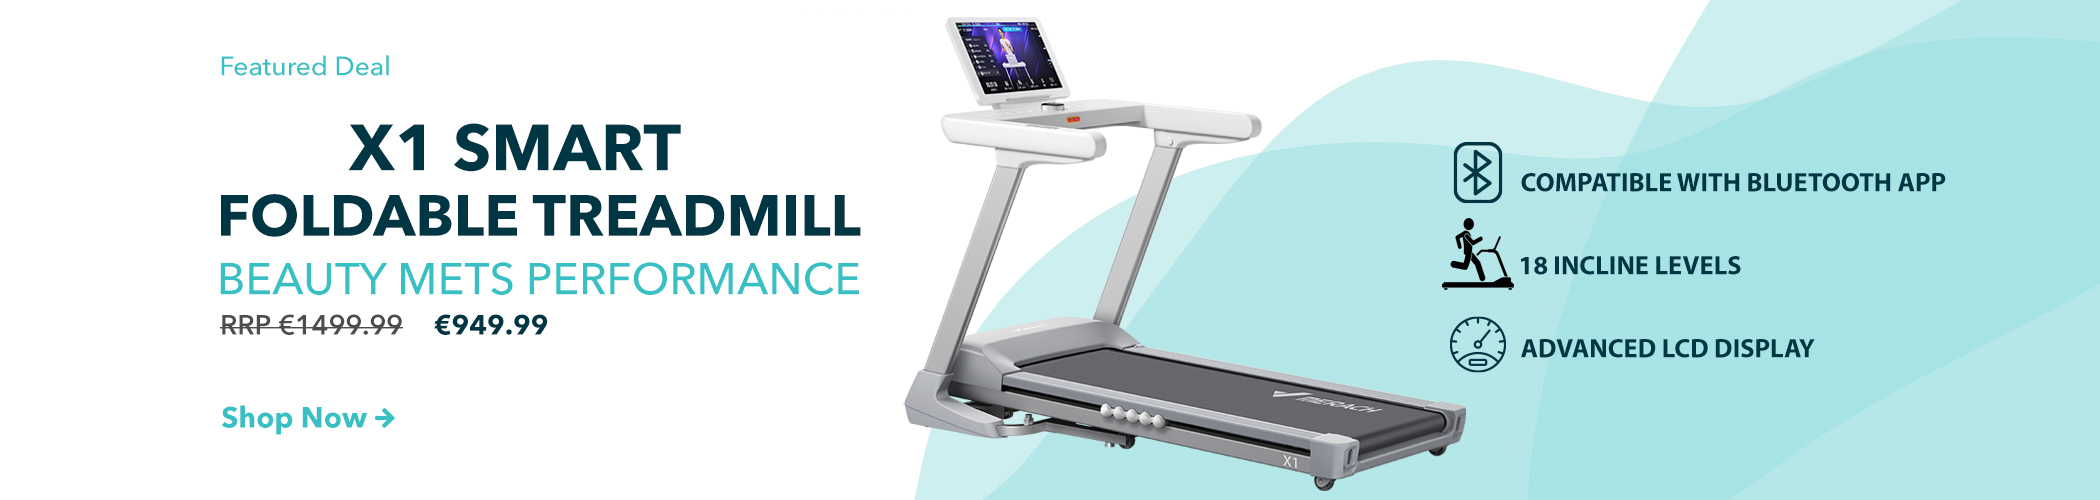 X1 Smart Folding Treadmill category banner for desktop with pricing